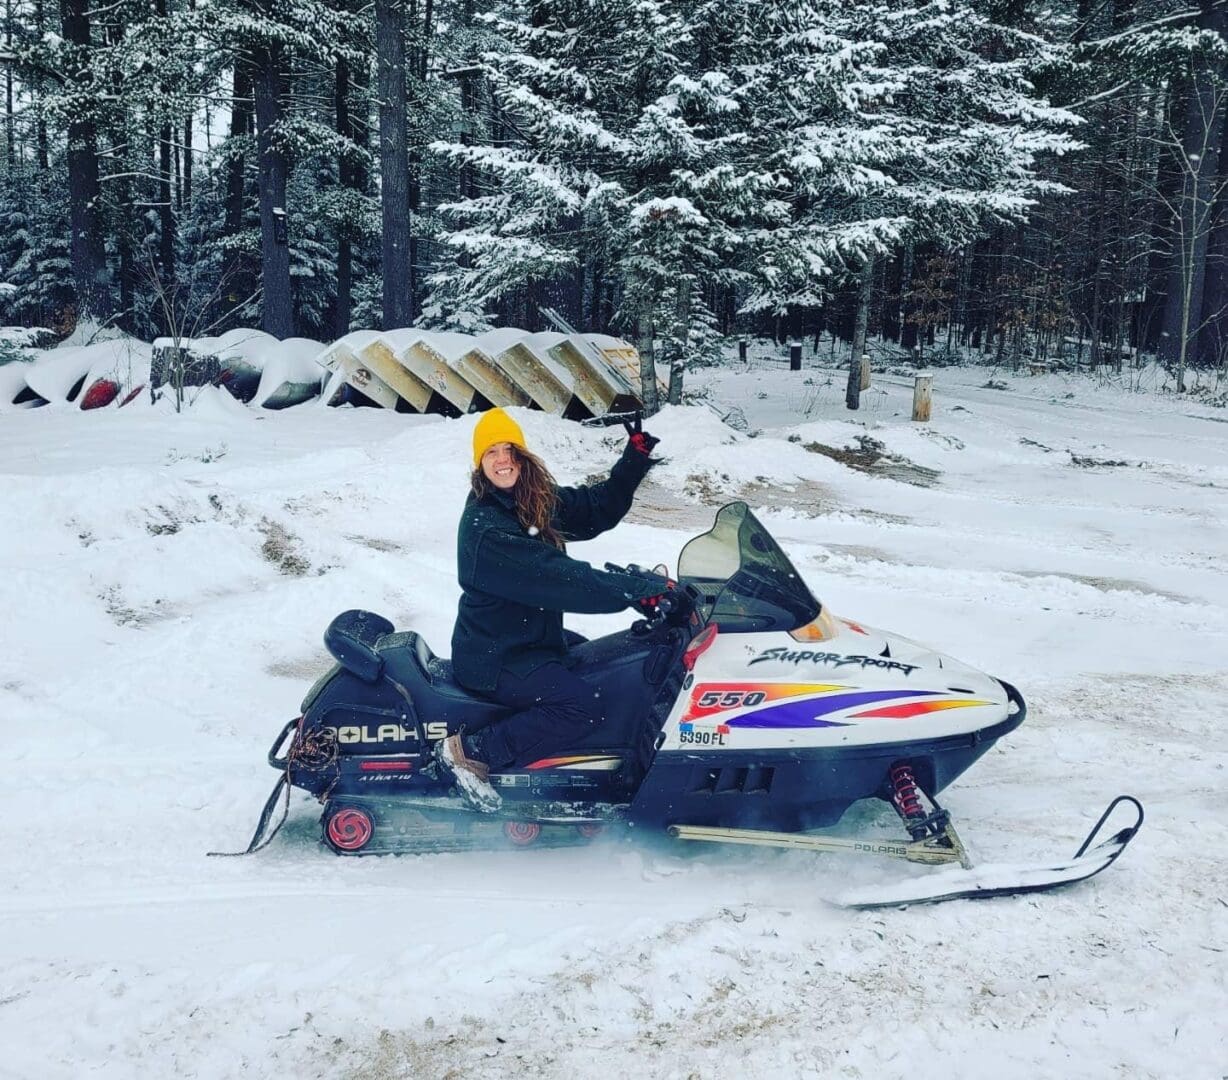 A woman wearing a yellow hat sits on a snowmobile, waving, in a snowy forest setting.